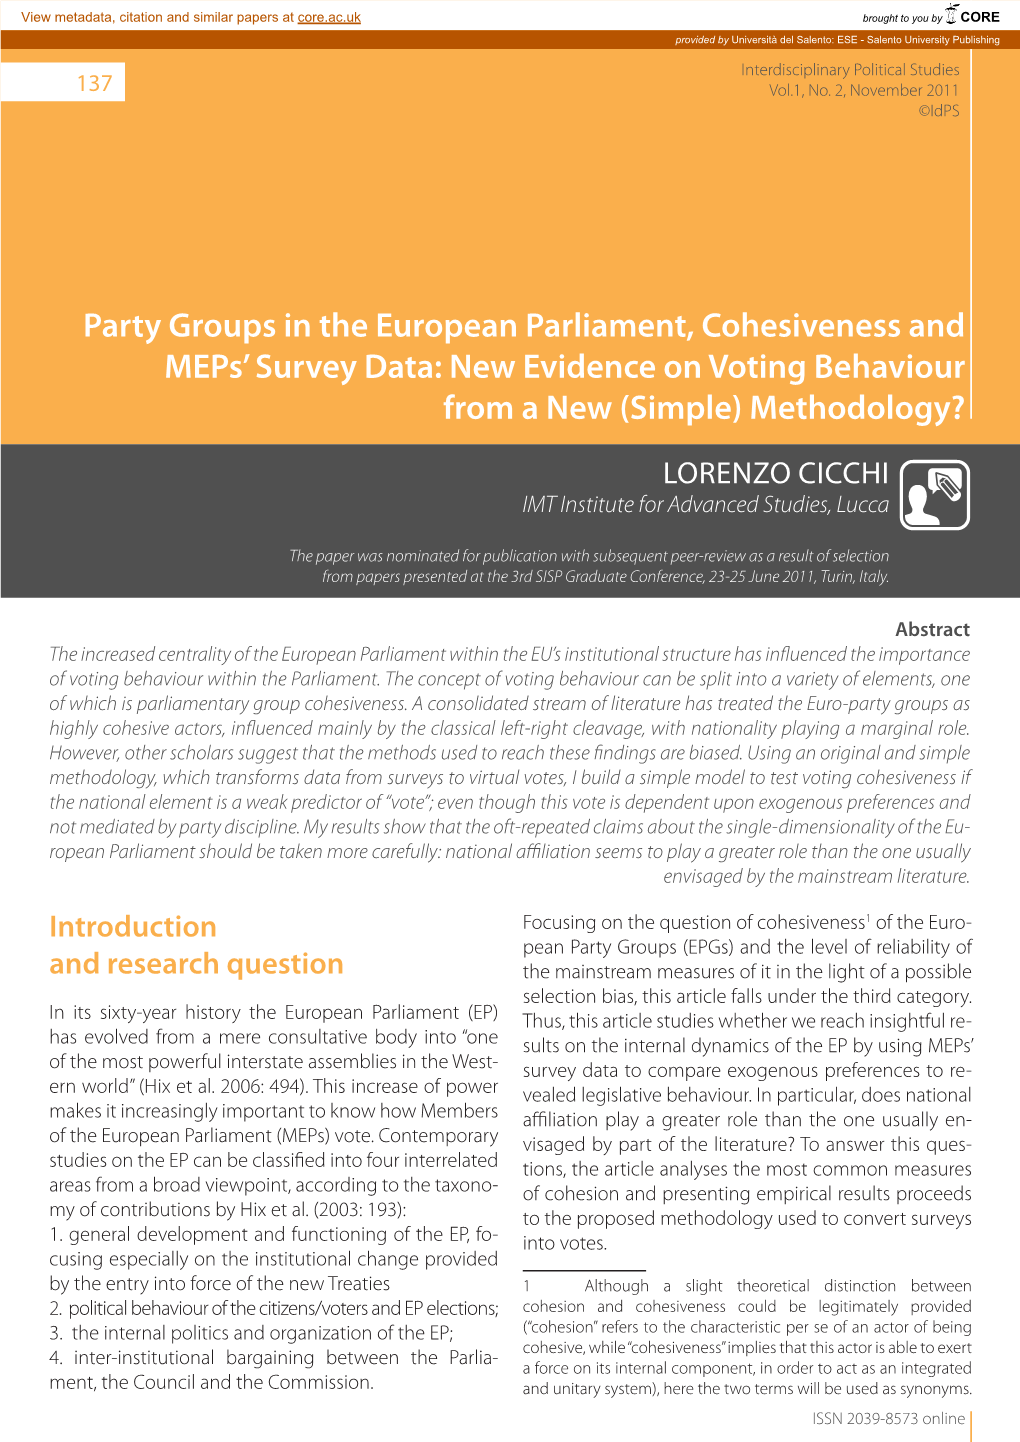 Party Groups in the European Parliament, Cohesiveness and Meps’ Survey Data: New Evidence on Voting Behaviour from a New (Simple) Methodology?